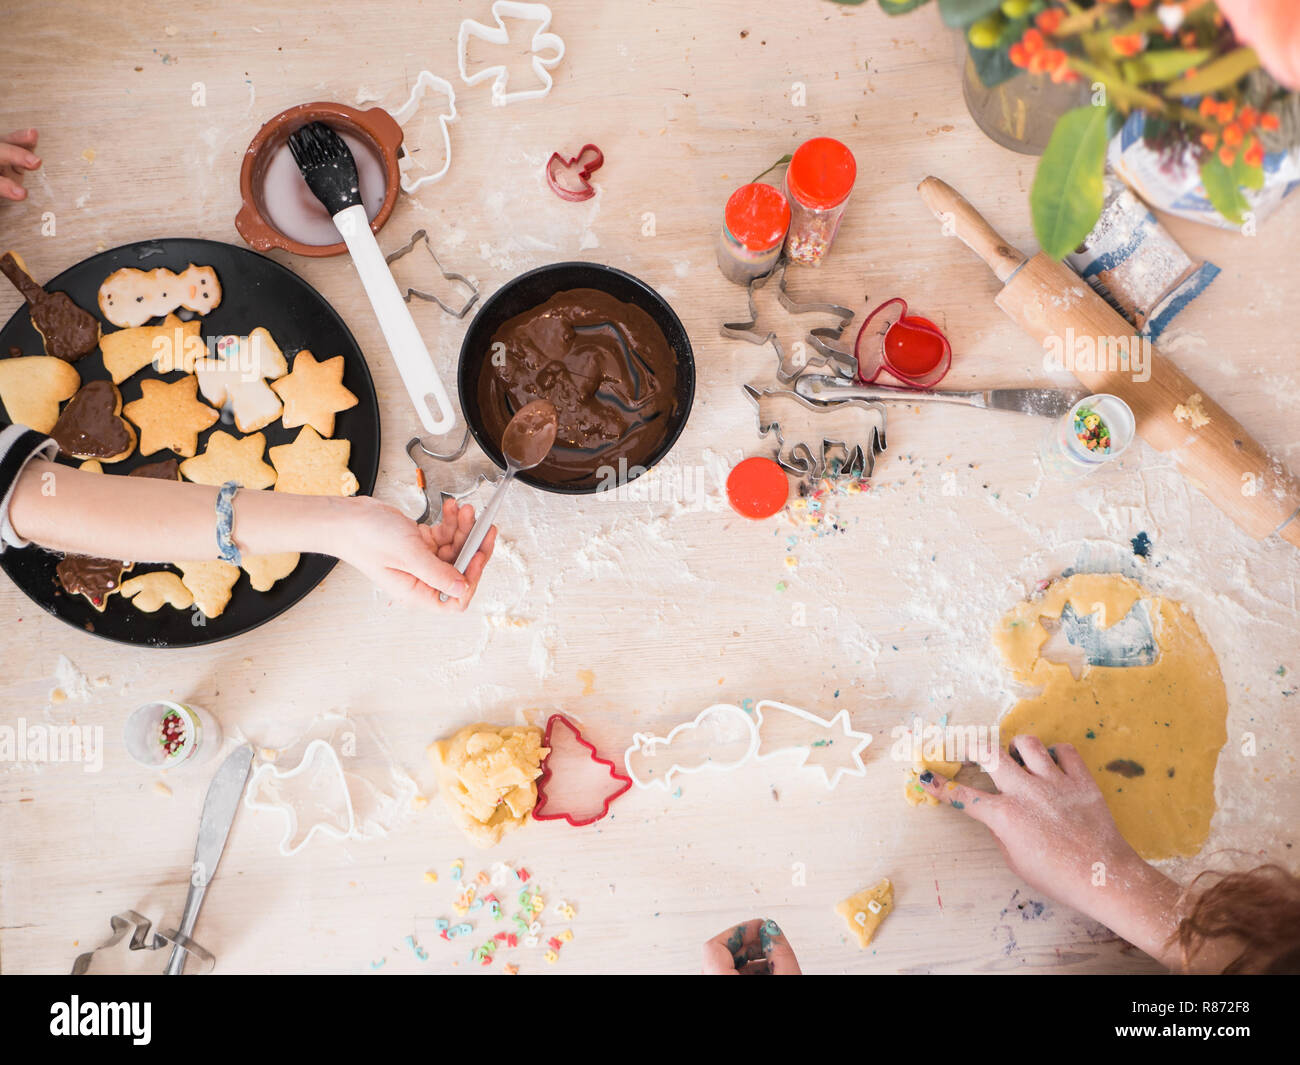 christmas bakery: Girls preparing christmas cookies, top view with  sifferent baking supplies, chaotic table Stock Photo - Alamy